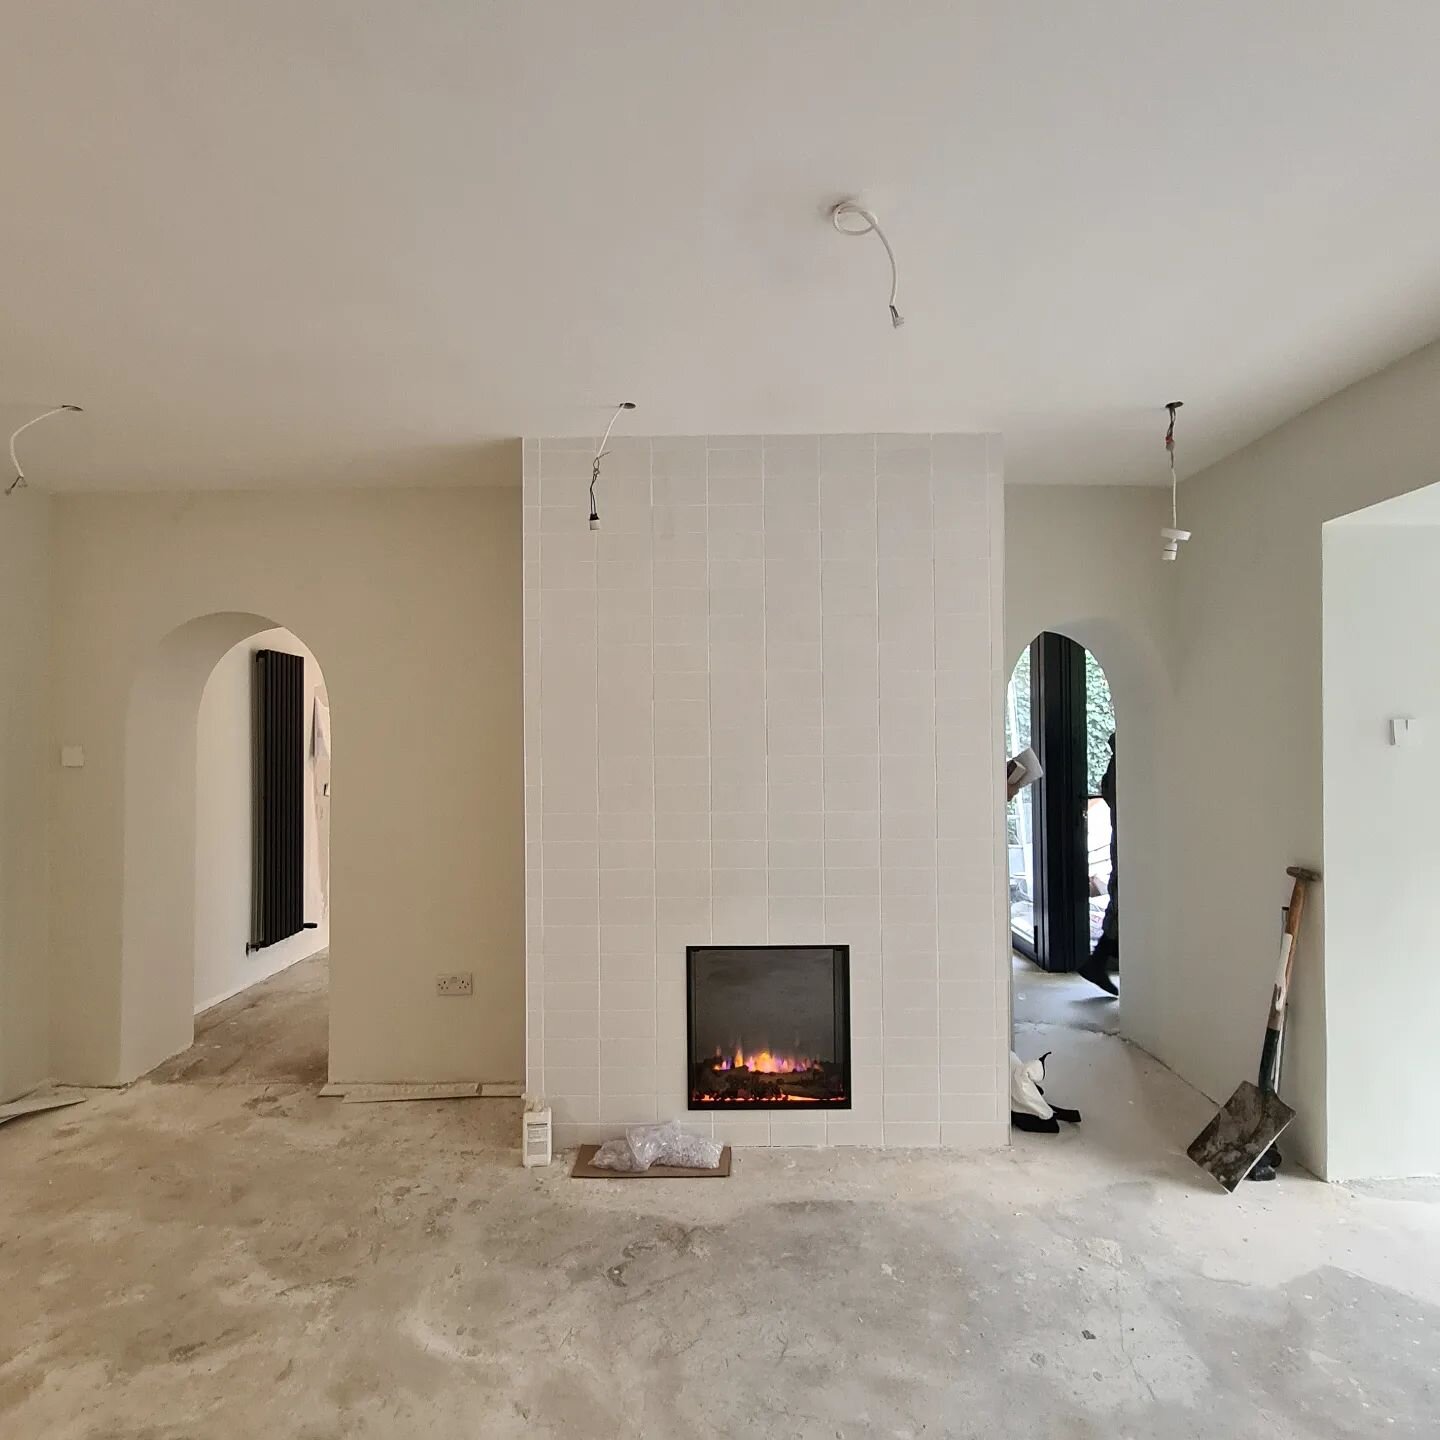 Todays site visit. This mews house is almost at the finish line. Its so cozy already. #midcenturymodern #midcenturymews #dublinmewshouse #midcenturyhome #keepitsimple